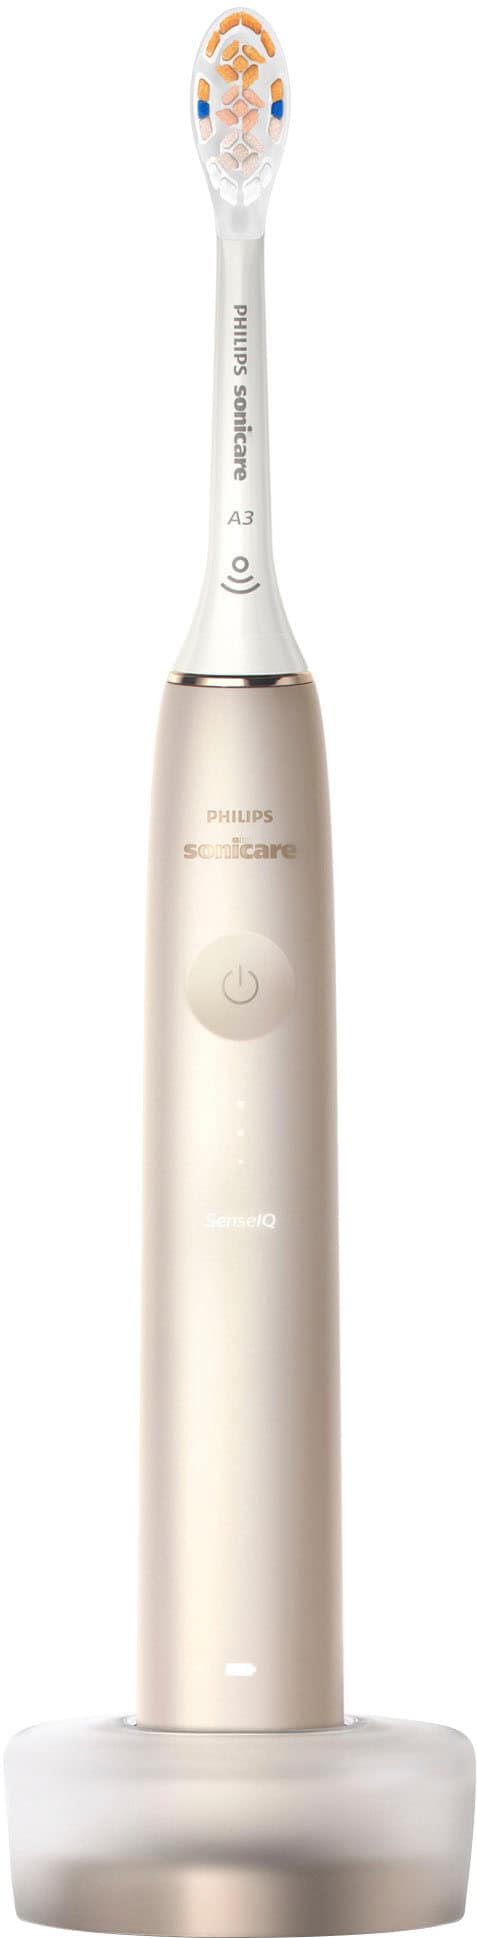 Philips Sonicare 9900 Prestige Rechargeable Electric Toothbrush with SenseIQ - Champagne_2